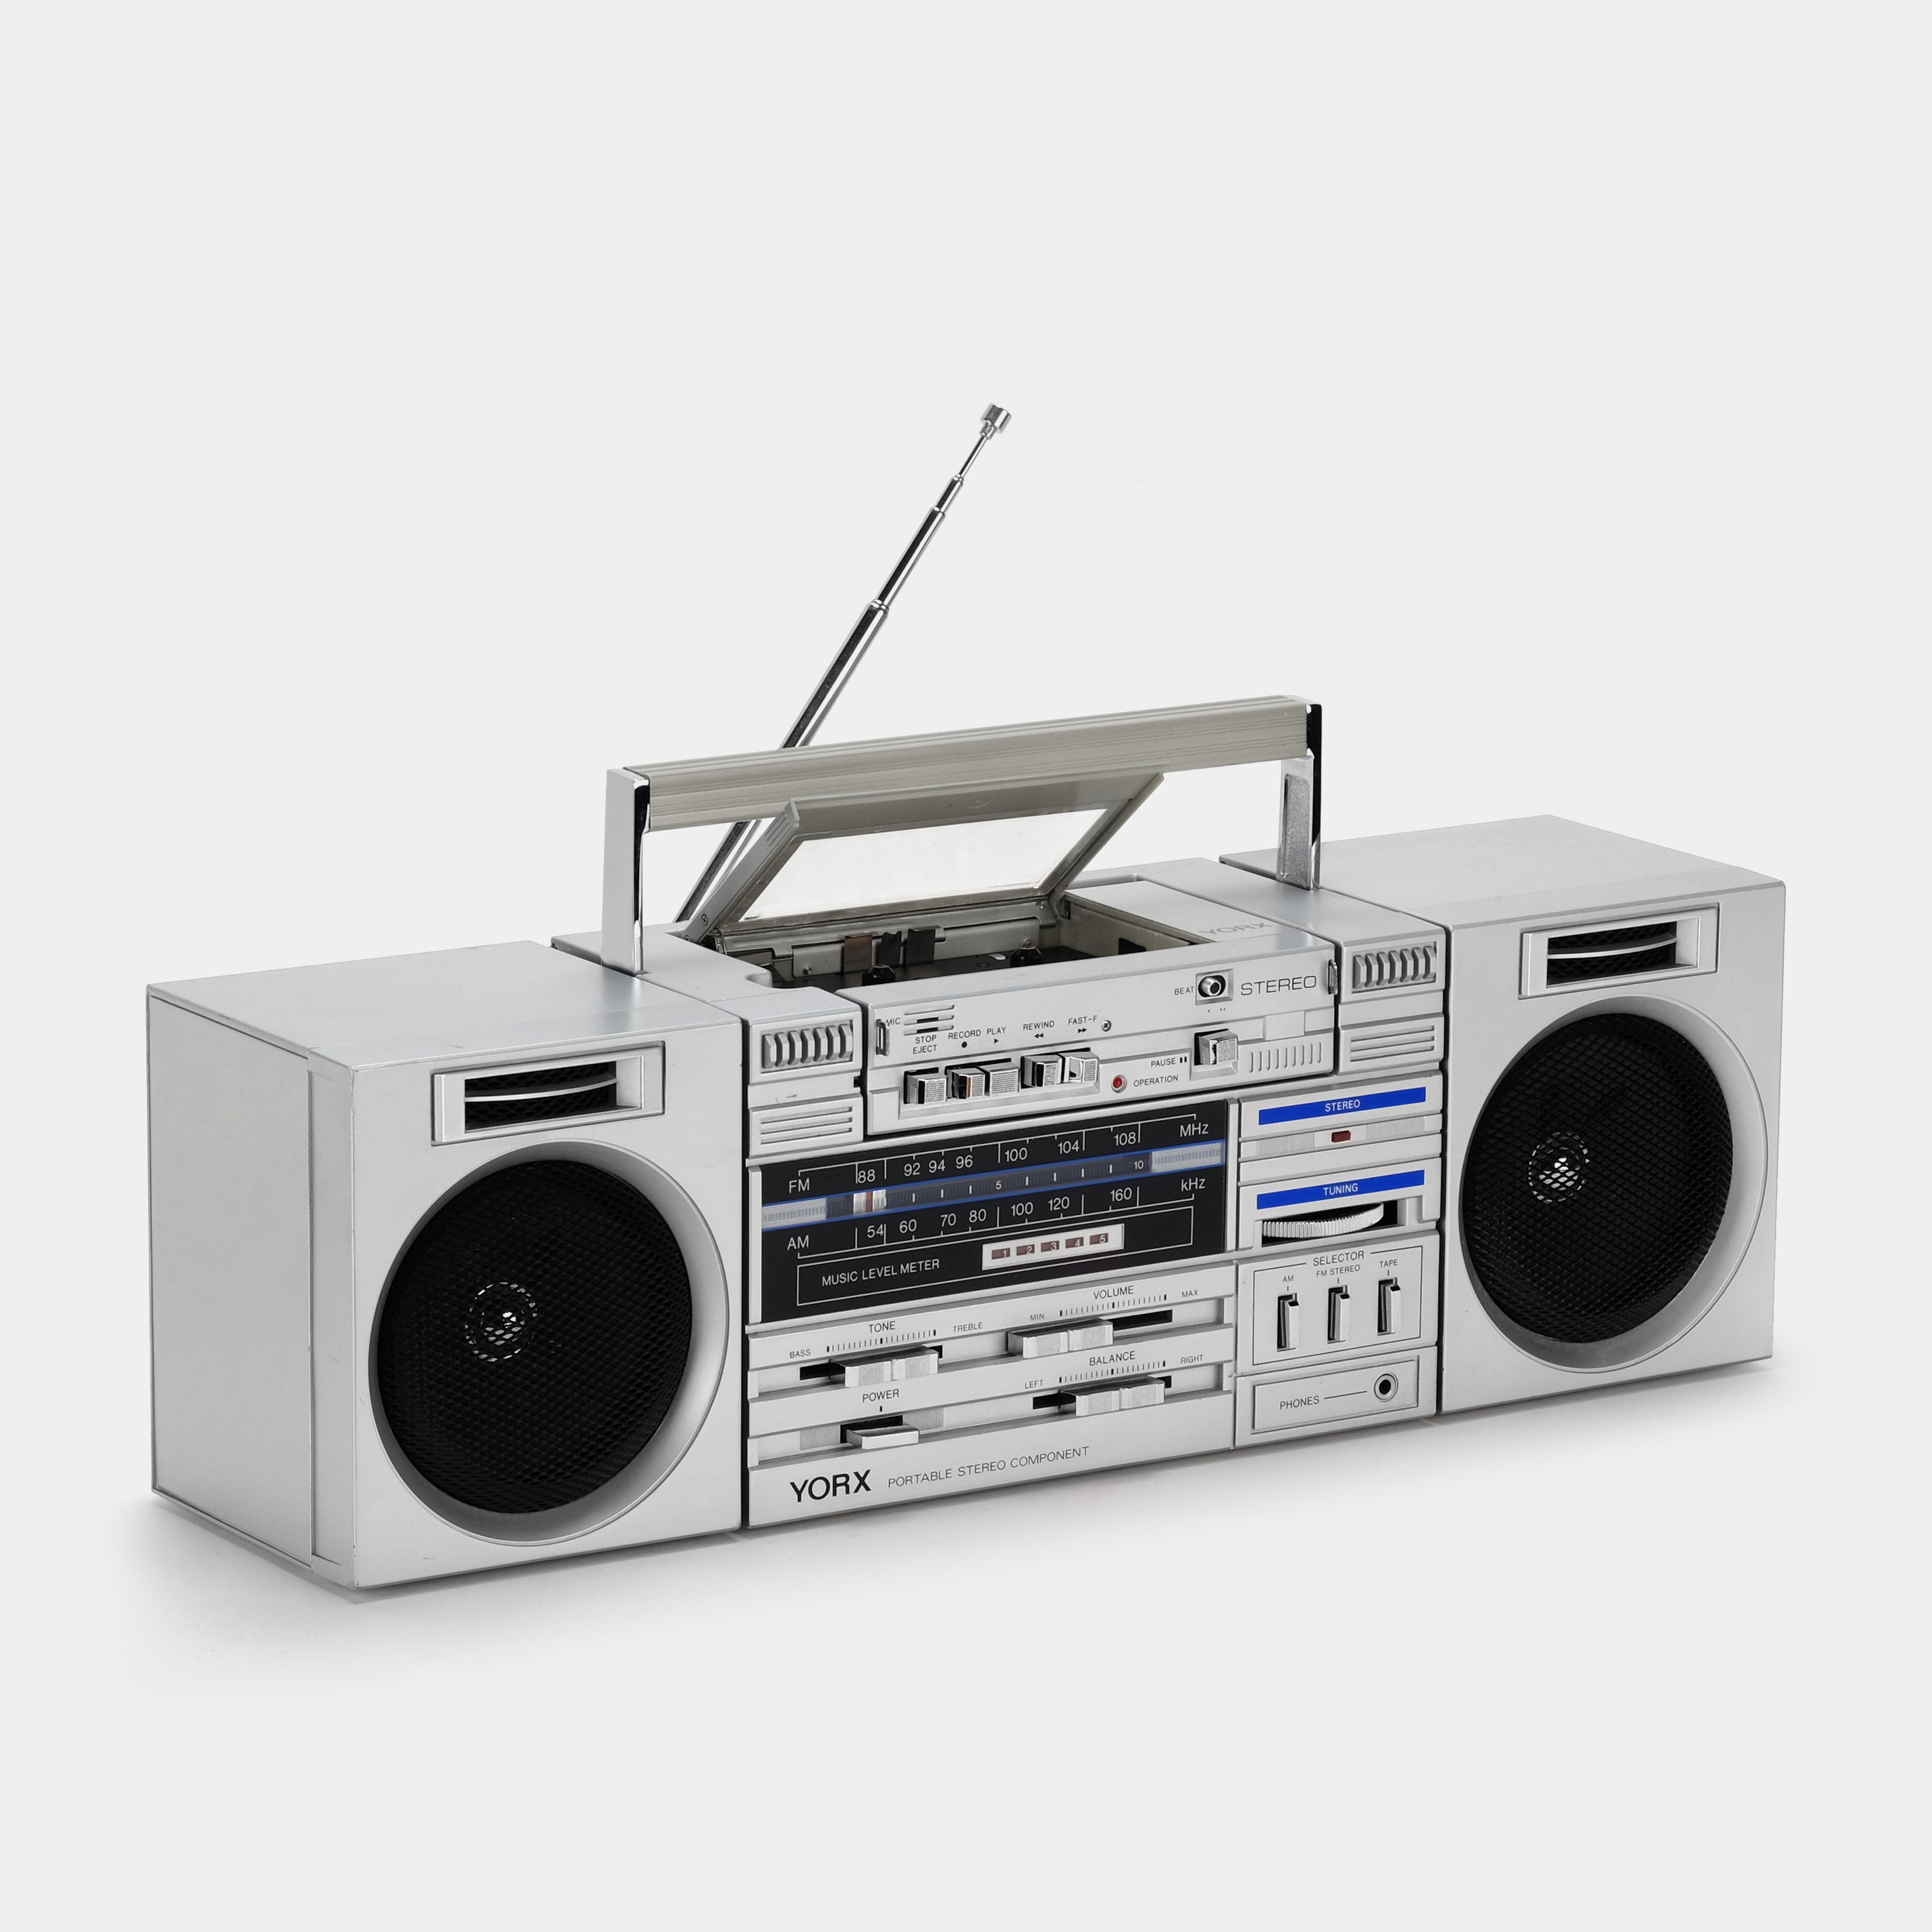 Yorx BP-04R AM/FM Stereo Boombox Cassette Recorder and Player